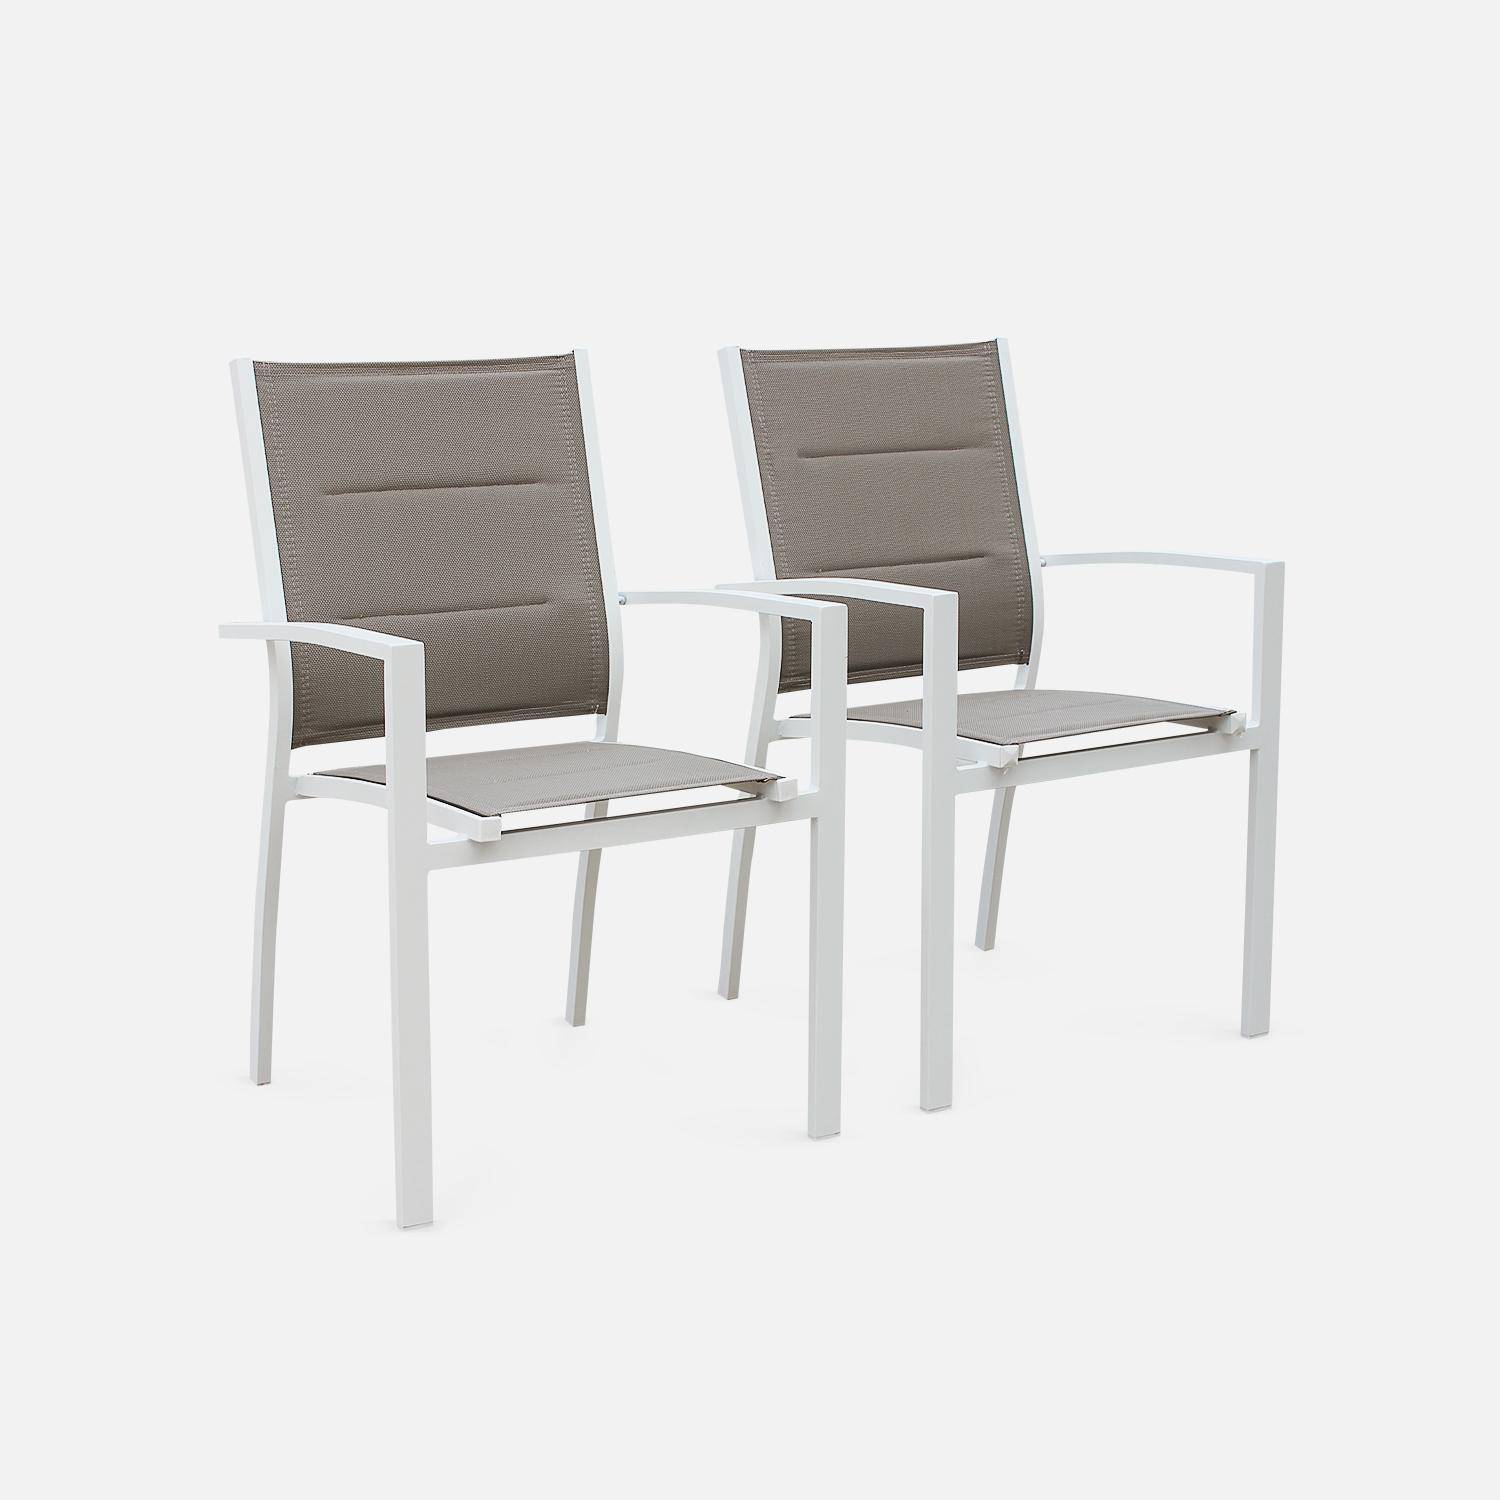 6-seater garden dining set, extendable 150-210cm aluminium table, 4 chairs and 2 armchairs - Chicago 6 - White frame, Beige-Brown textilene Photo7